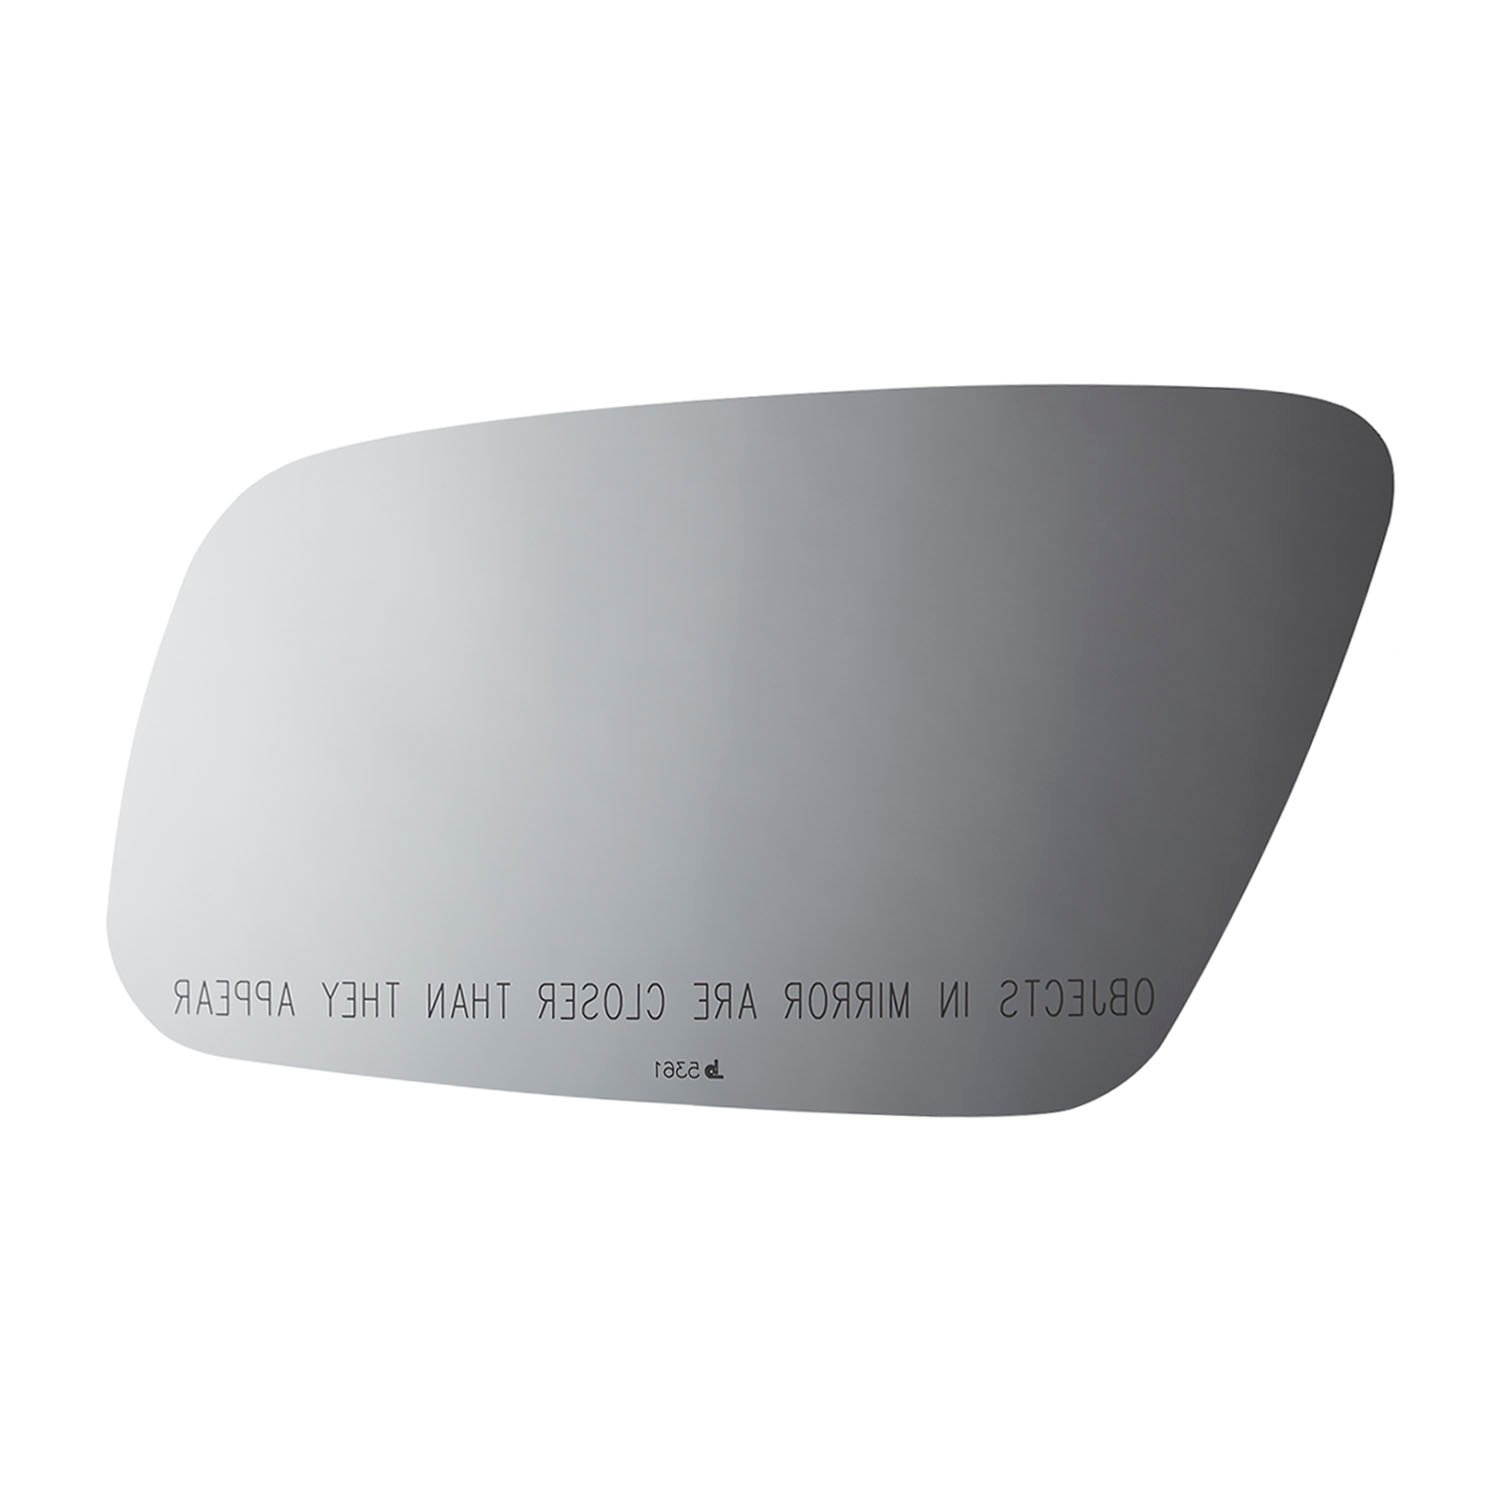 5361 SIDE VIEW MIRROR